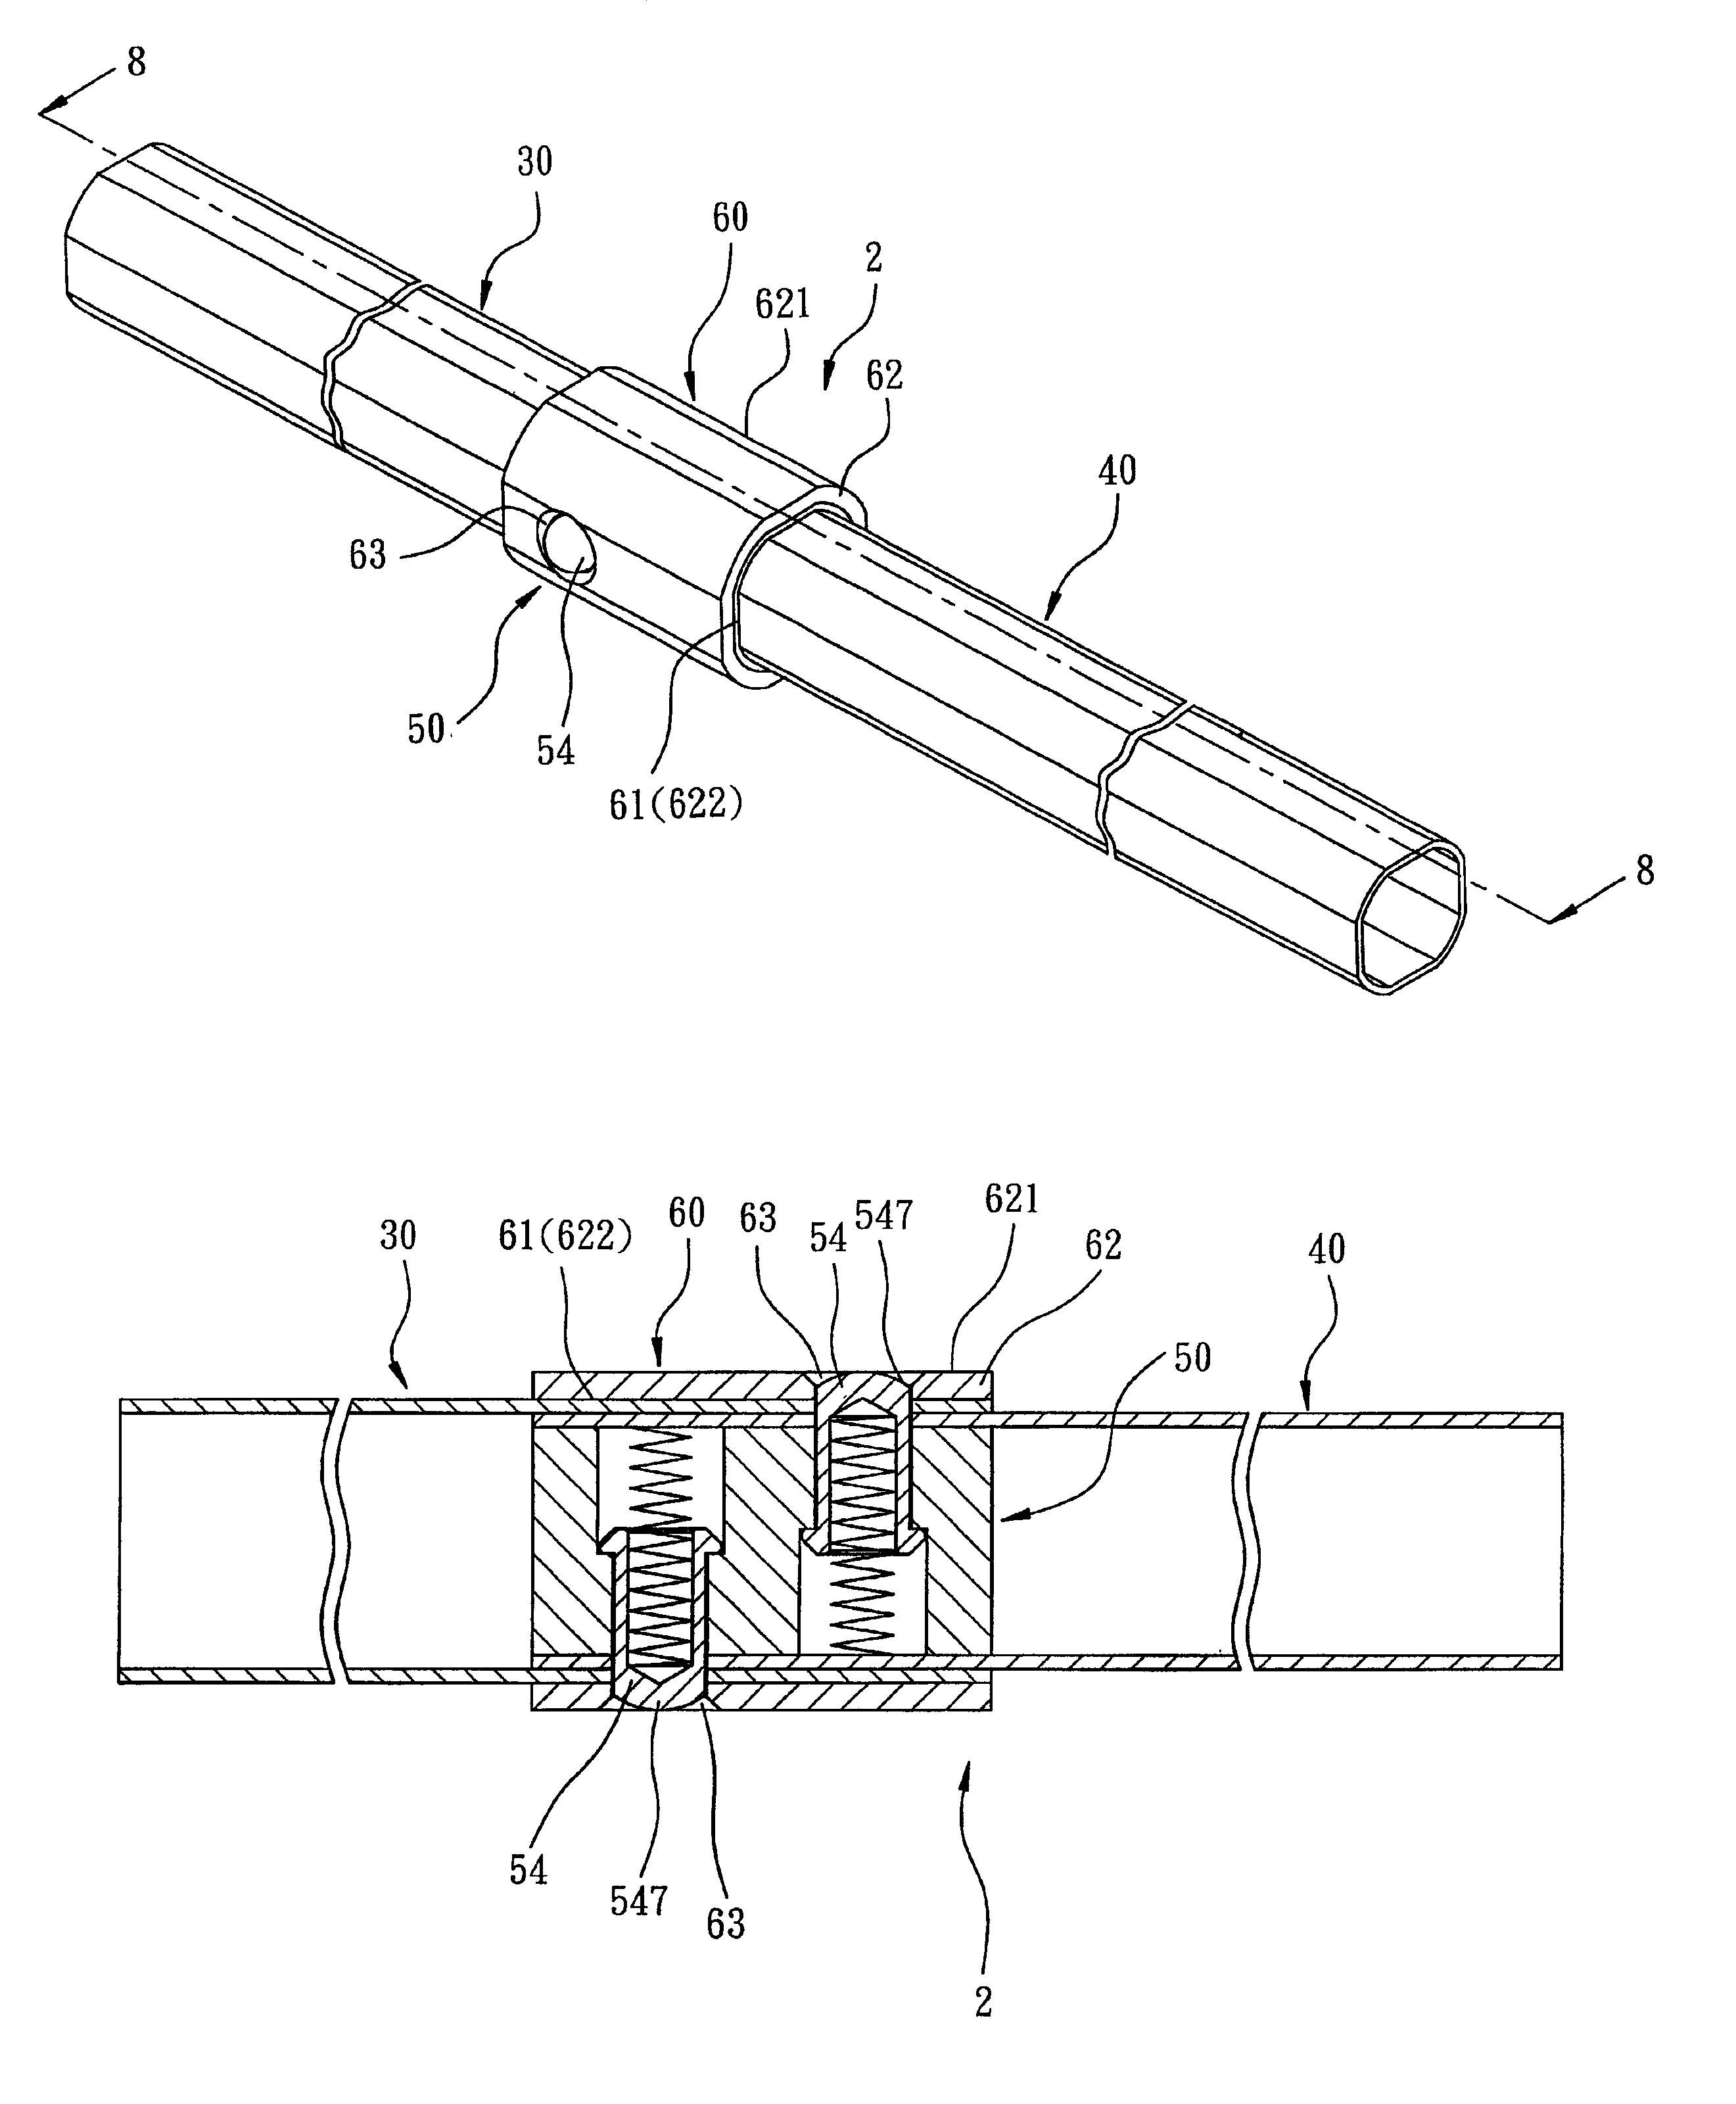 Retractable rod assembly